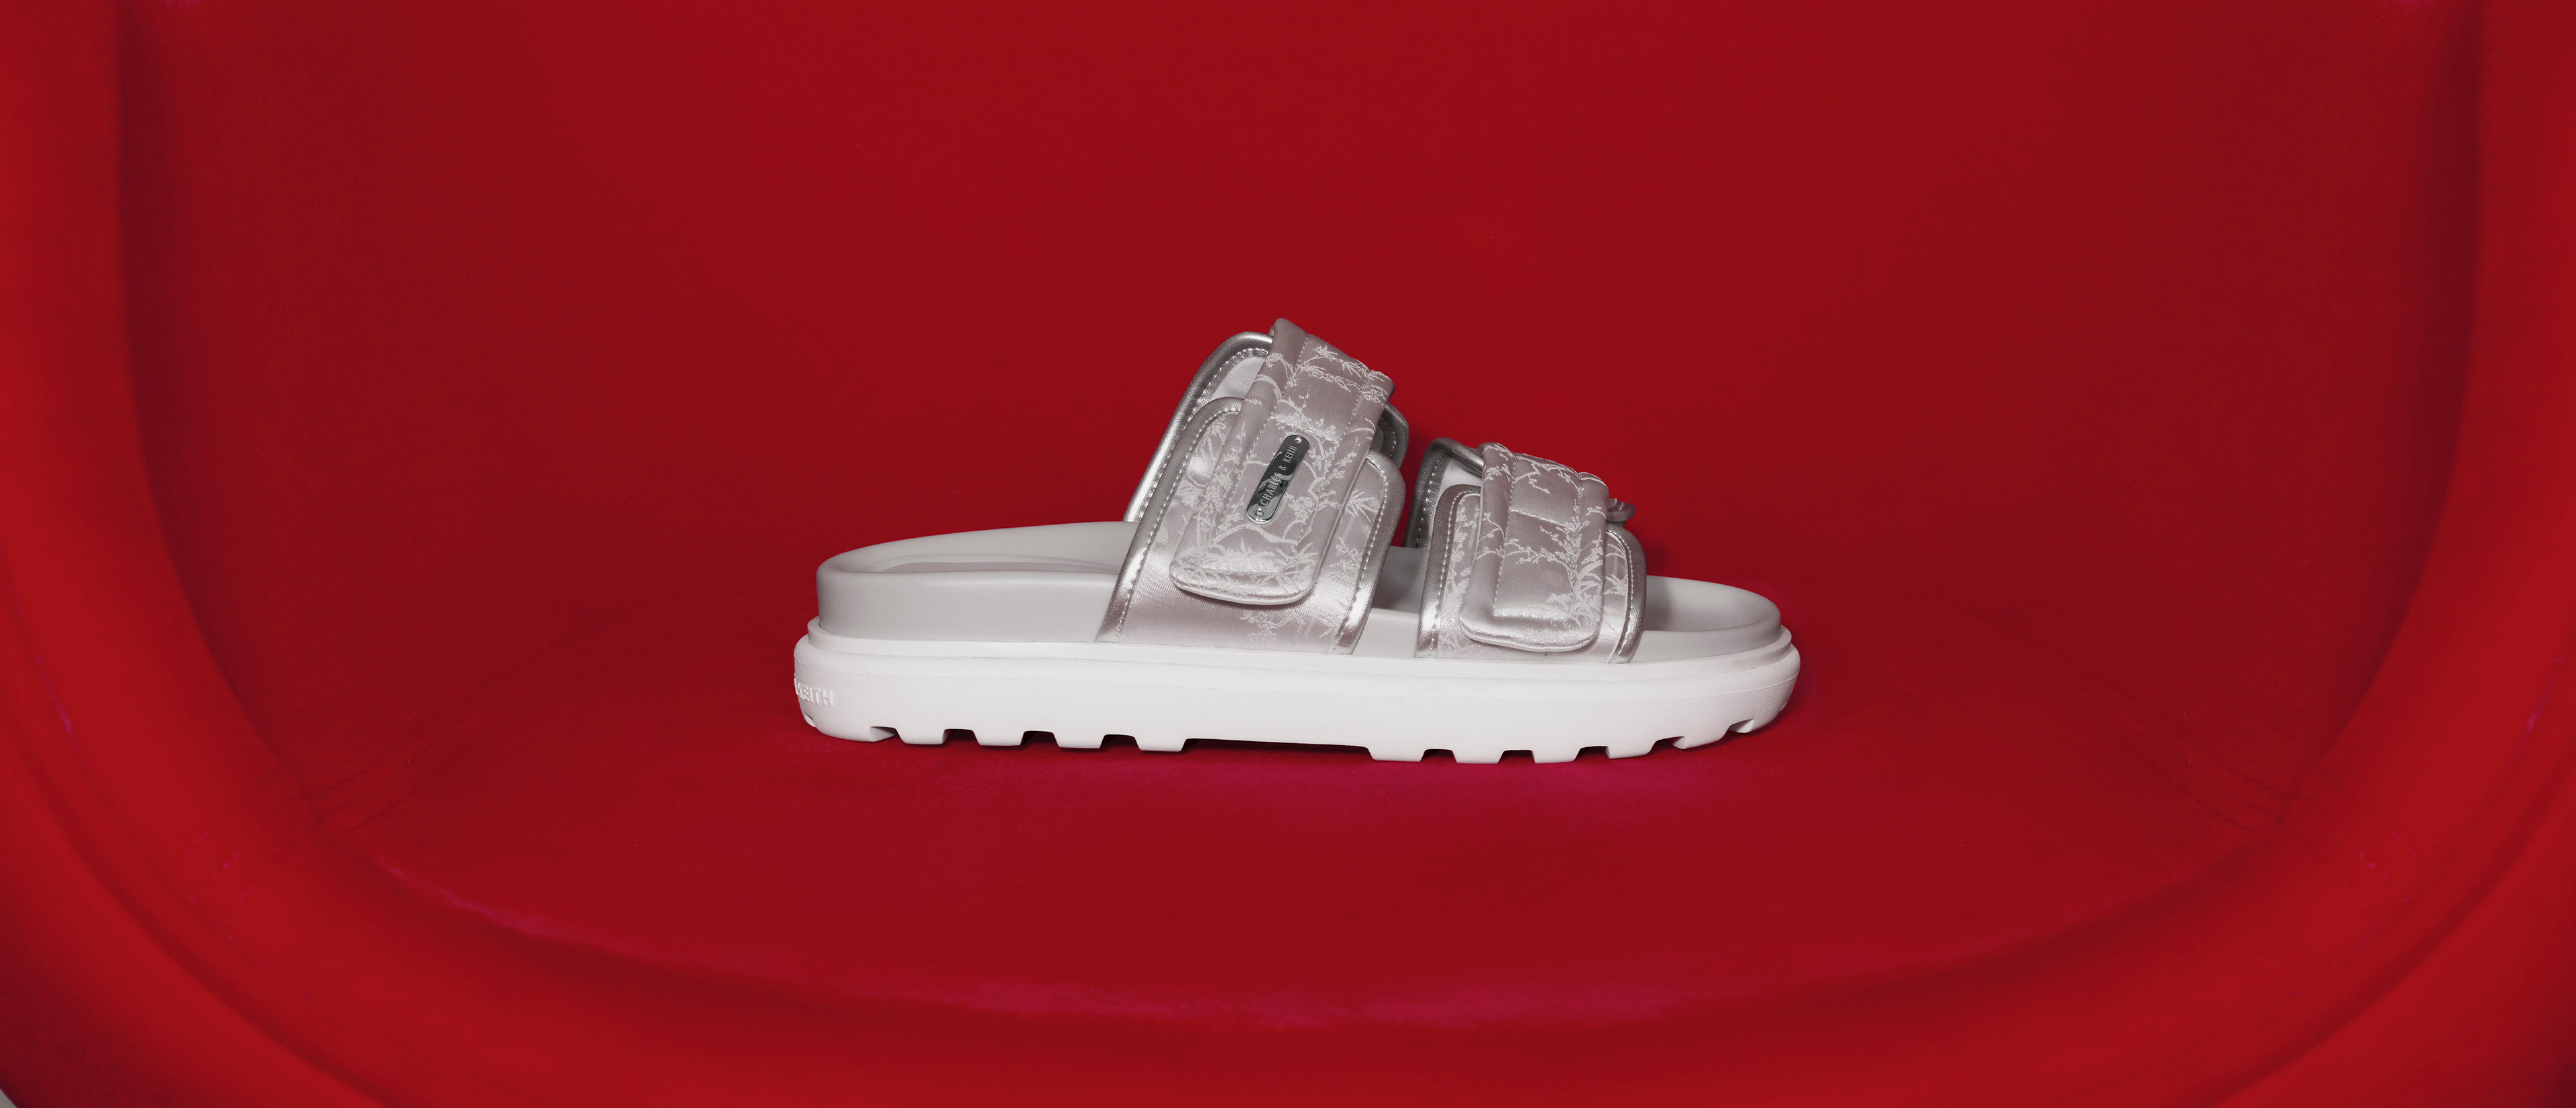 Women’s Clementine Recycled Polyester Sports Sandals in silver - CHARLES & KEITH